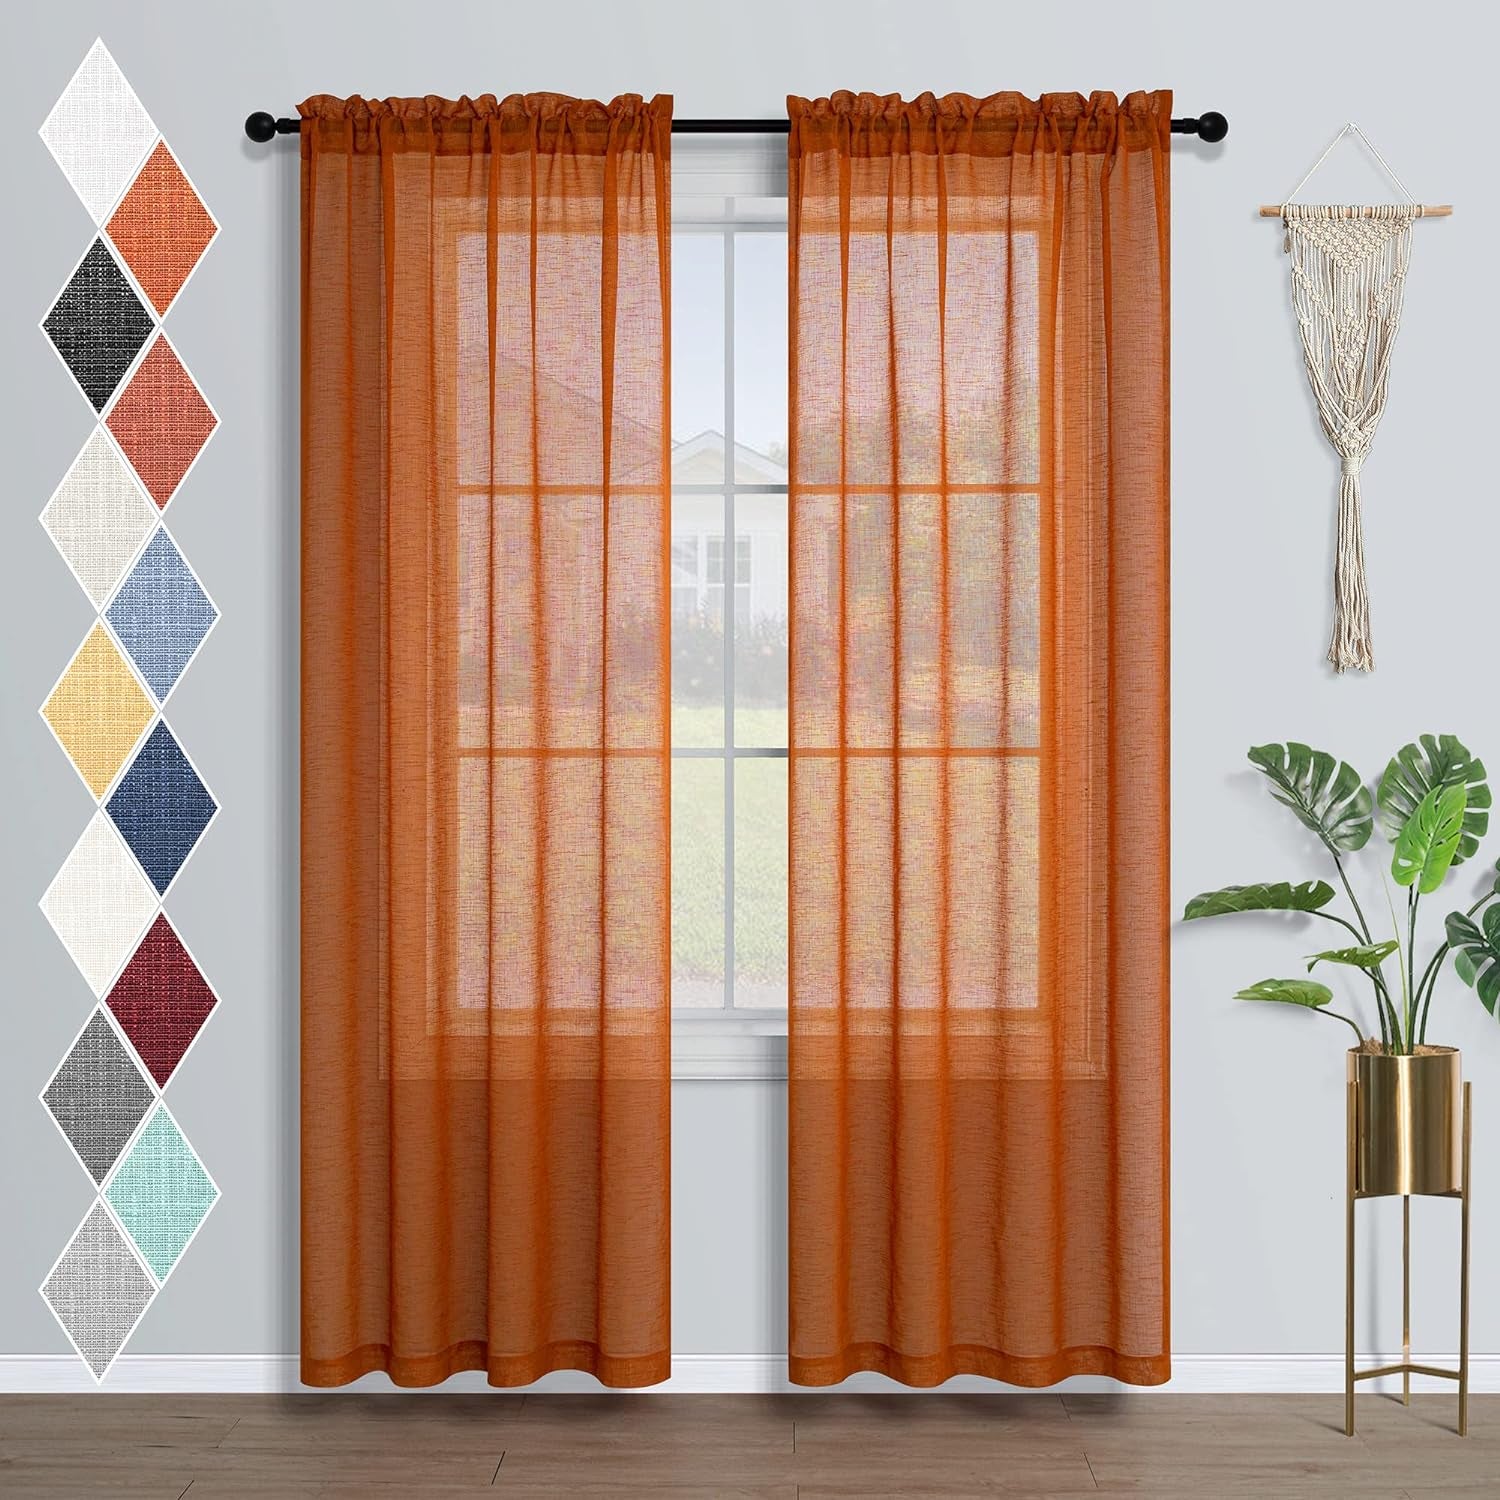 Mrs.Naturall 84 Inch Burnt Orange Semi Sheer Curtains and Blackout Curtains for Bedroom Living Room Decor  Mrs.Naturall   